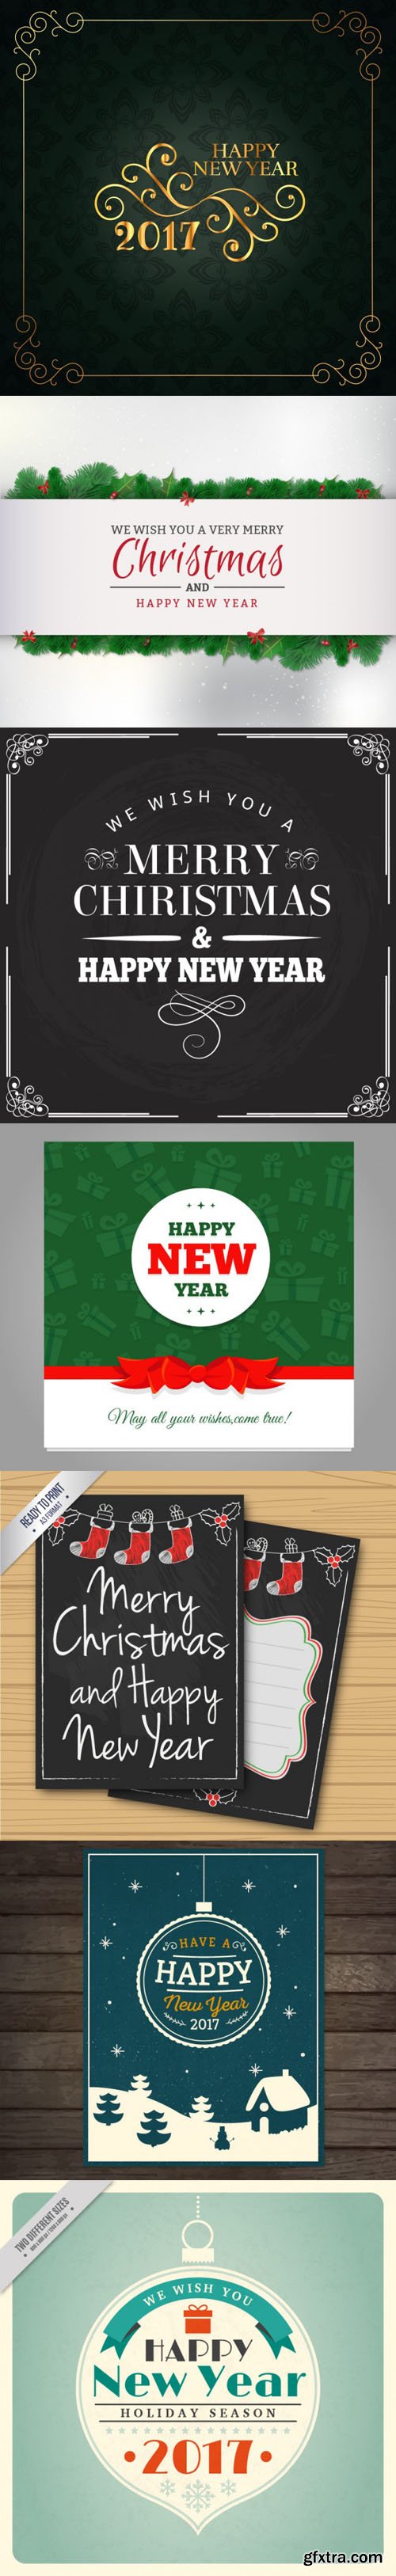 New Year 2017 Greeting Cards in Vector [7 Templates]